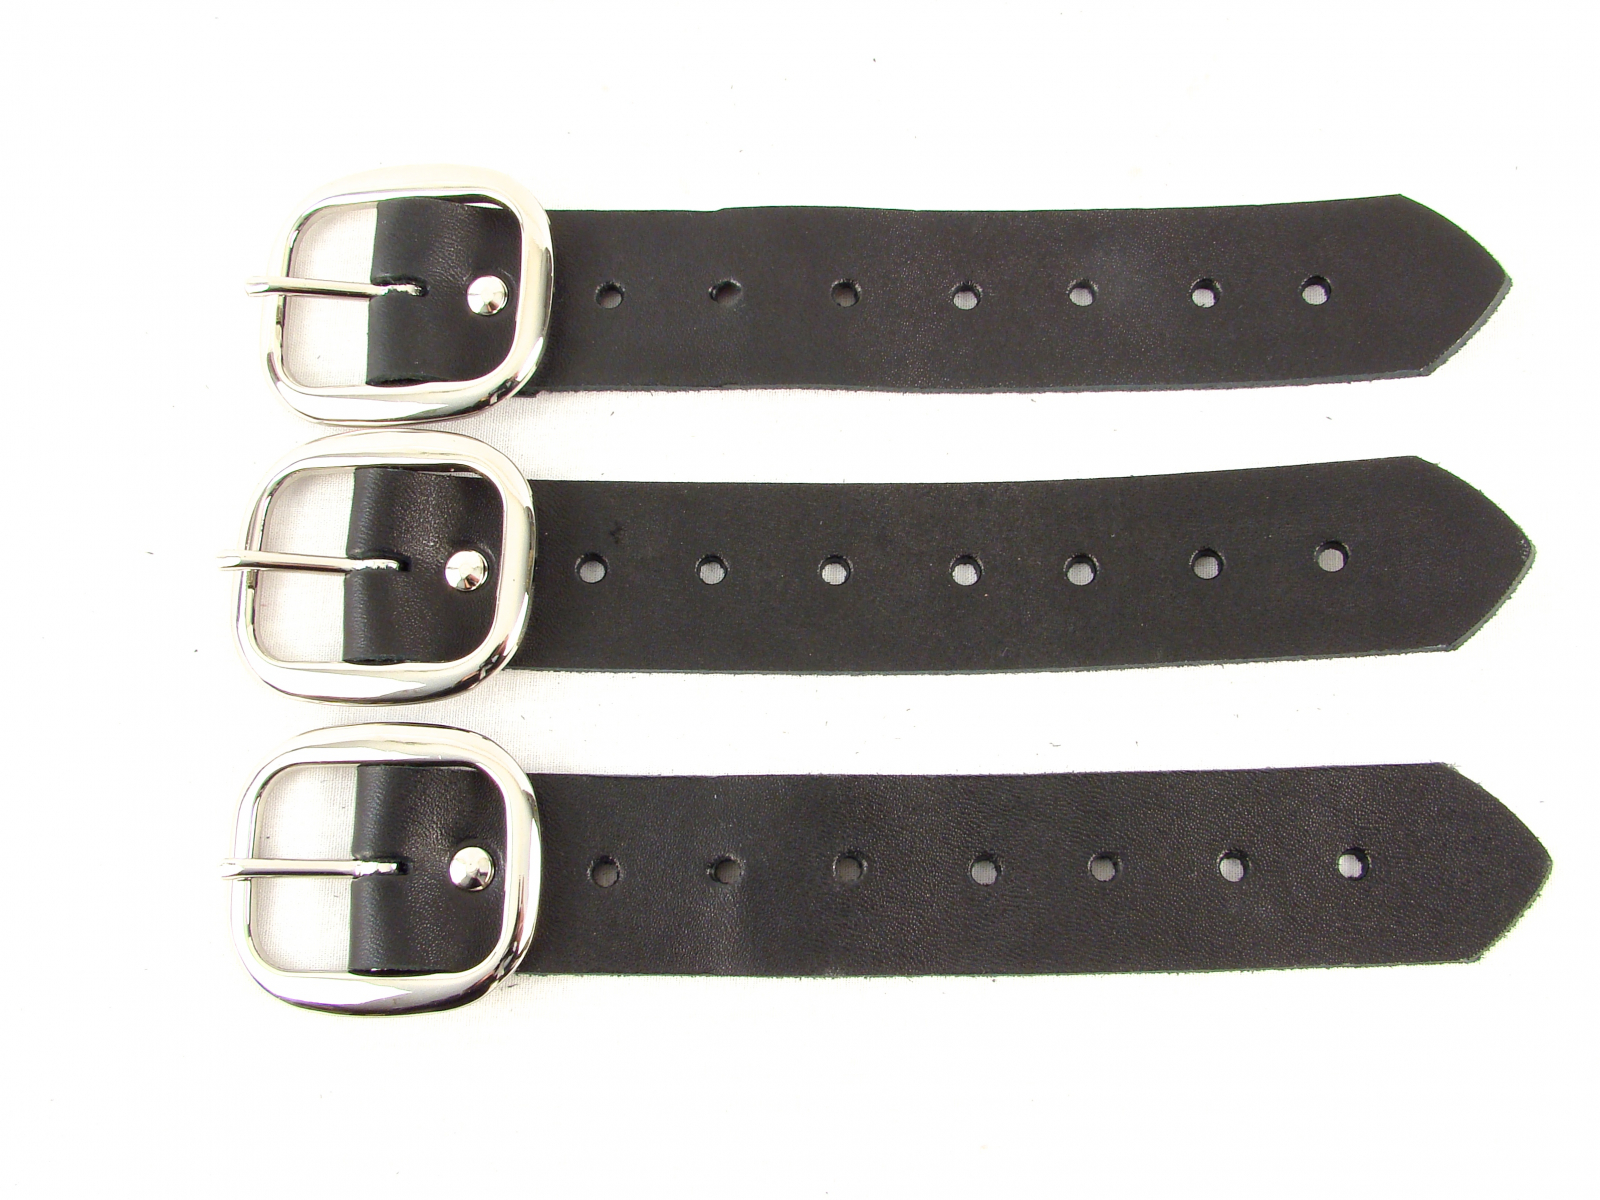 Width 1 1/4 inch or 1 1/2 inch Set of 3 Kilt Extension Straps 